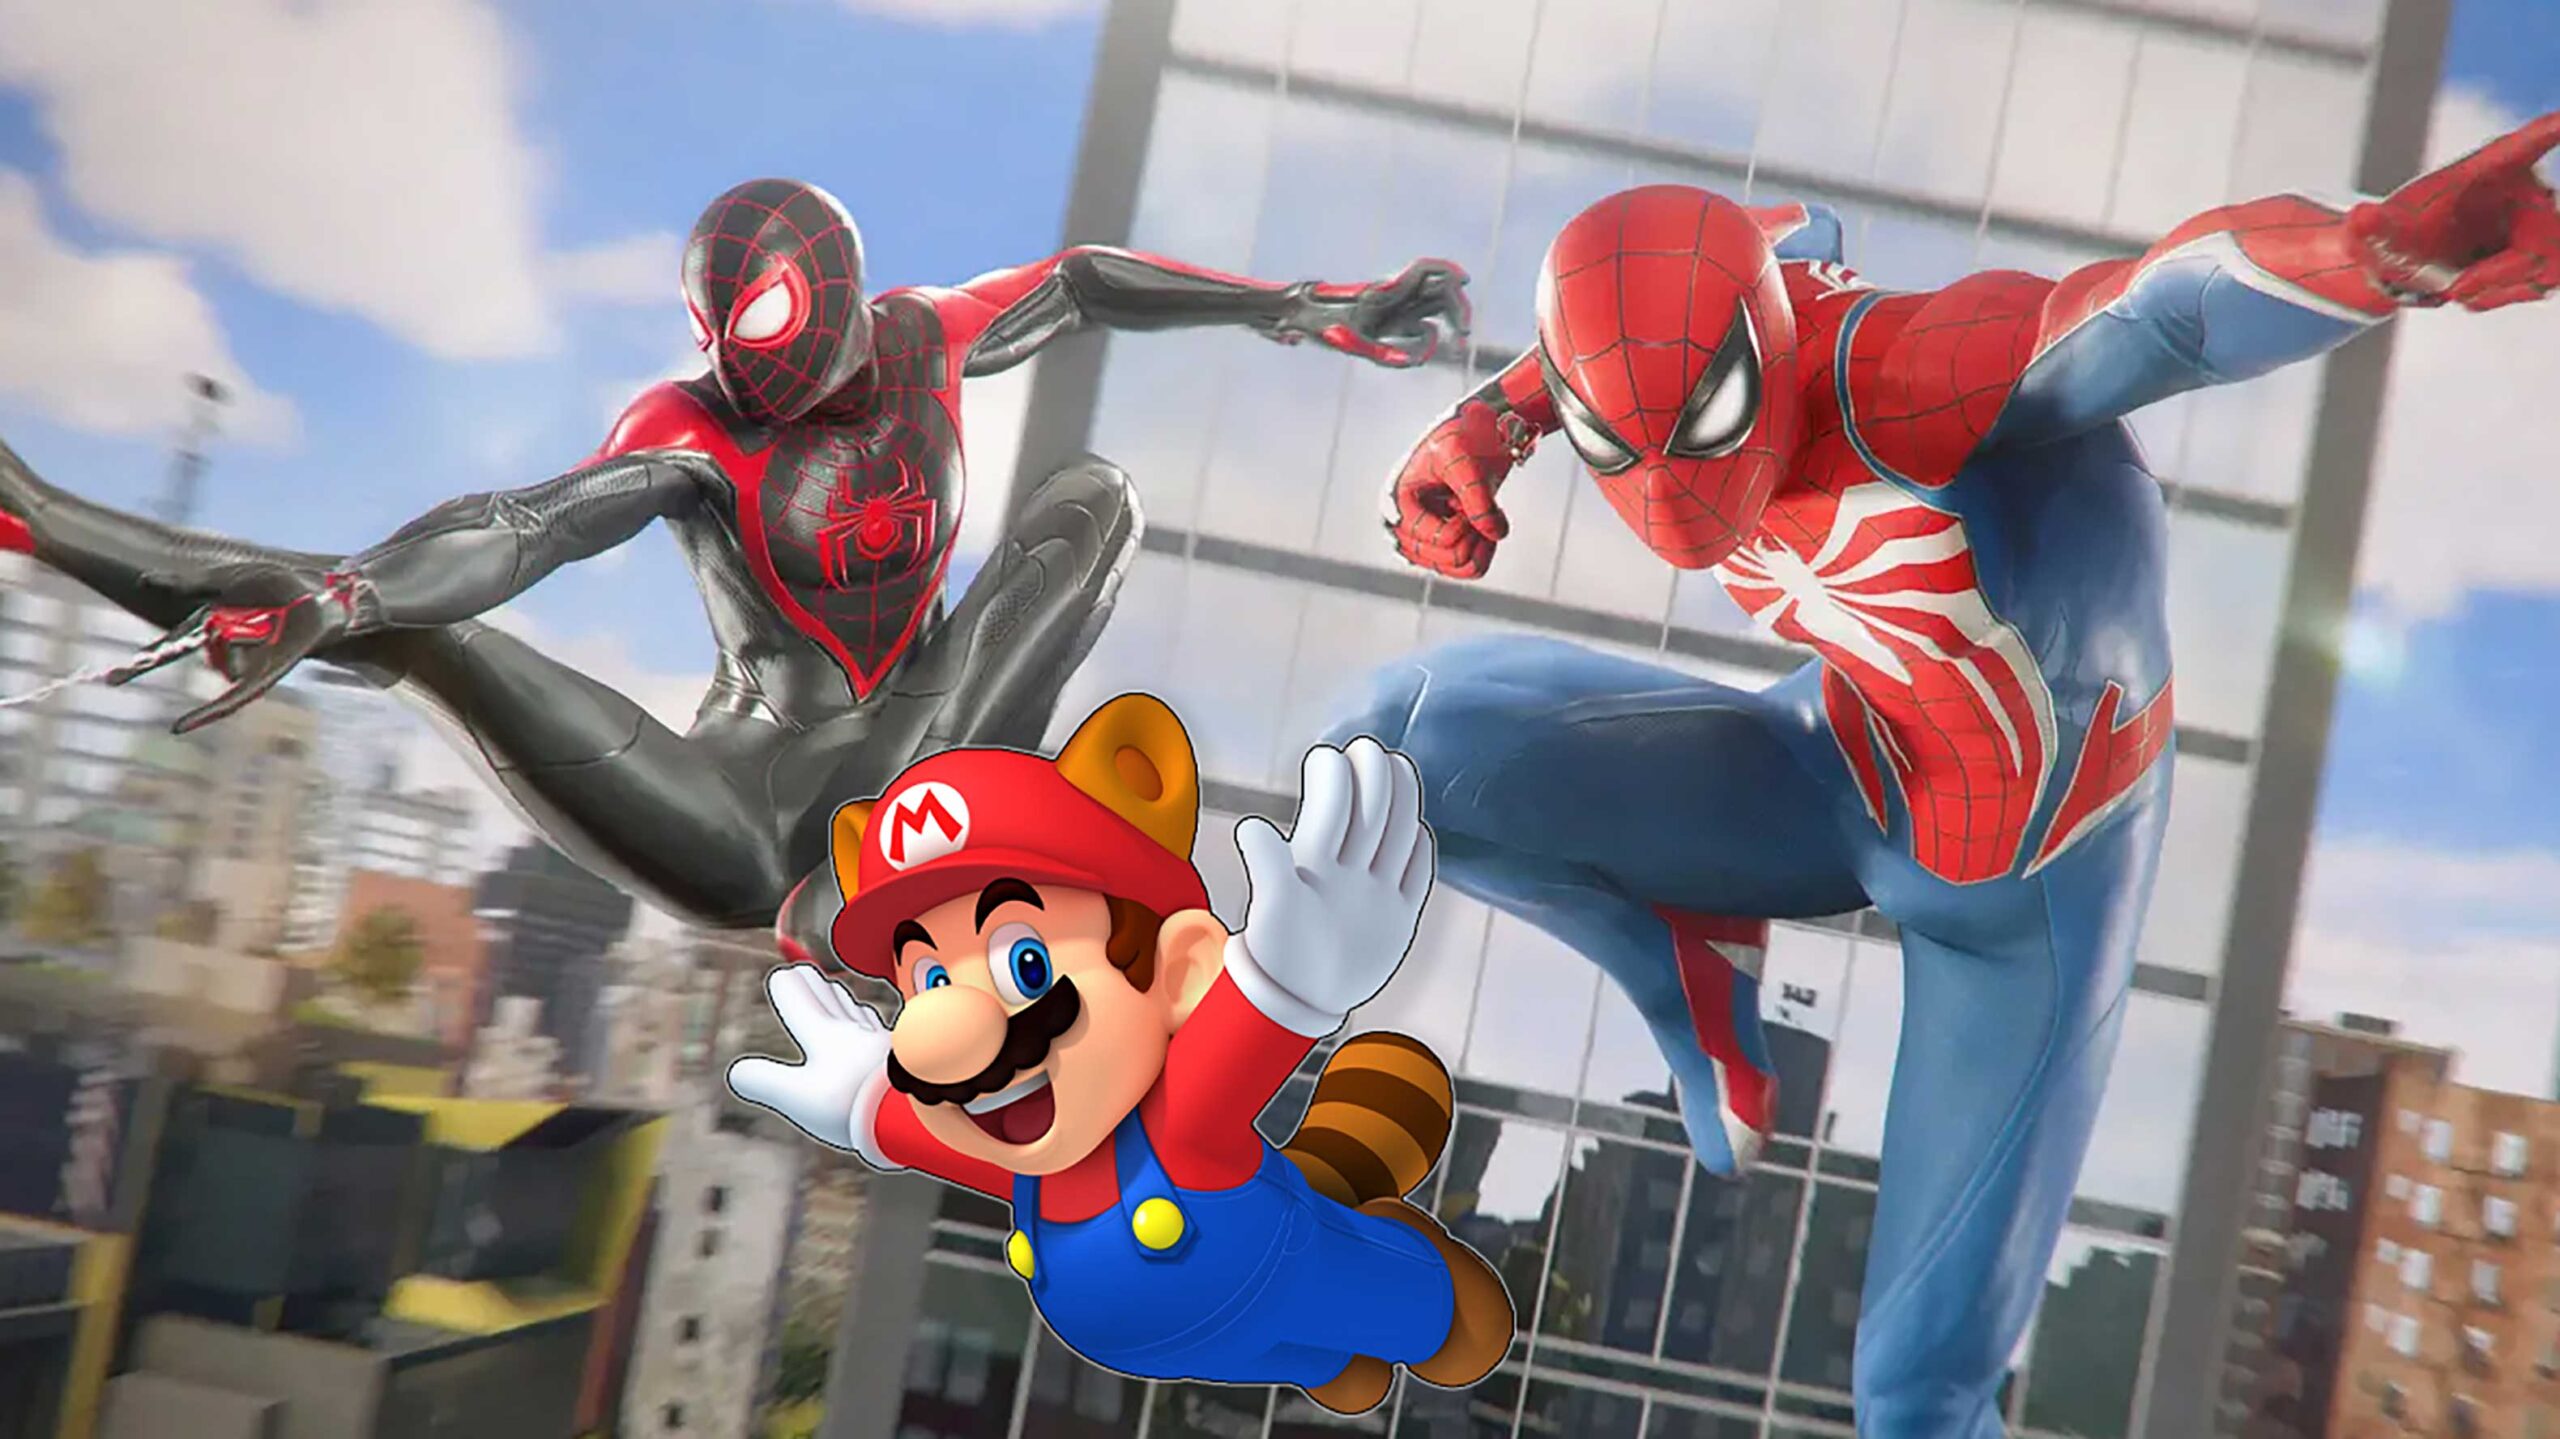 Gaming gets its ‘Barbenheimer’ moment with Spider-Man and Mario launch